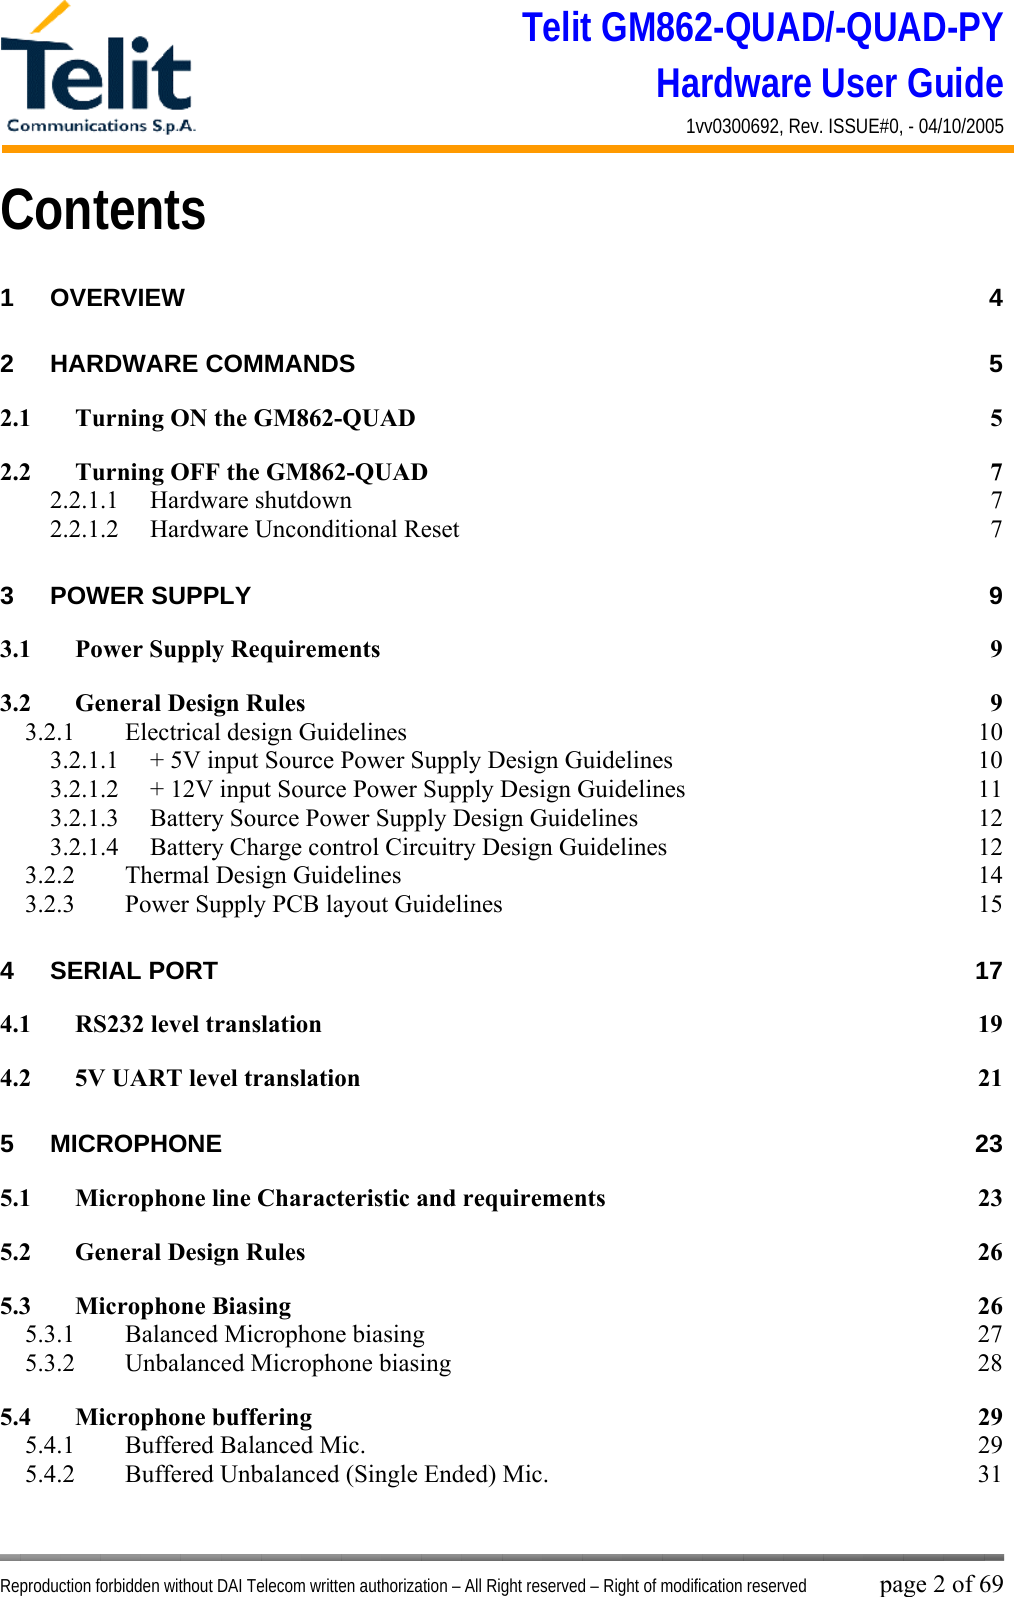 Telit GM862-QUAD/-QUAD-PY Hardware User Guide 1vv0300692, Rev. ISSUE#0, - 04/10/2005   Reproduction forbidden without DAI Telecom written authorization – All Right reserved – Right of modification reserved page 2 of 69 Contents 1 OVERVIEW 4 2 HARDWARE COMMANDS  5 2.1 Turning ON the GM862-QUAD  5 2.2 Turning OFF the GM862-QUAD  7 2.2.1.1 Hardware shutdown  7 2.2.1.2  Hardware Unconditional Reset  7 3 POWER SUPPLY  9 3.1 Power Supply Requirements  9 3.2 General Design Rules  9 3.2.1  Electrical design Guidelines  10 3.2.1.1  + 5V input Source Power Supply Design Guidelines  10 3.2.1.2  + 12V input Source Power Supply Design Guidelines  11 3.2.1.3  Battery Source Power Supply Design Guidelines  12 3.2.1.4  Battery Charge control Circuitry Design Guidelines  12 3.2.2  Thermal Design Guidelines  14 3.2.3  Power Supply PCB layout Guidelines  15 4 SERIAL PORT  17 4.1 RS232 level translation  19 4.2 5V UART level translation  21 5 MICROPHONE 23 5.1 Microphone line Characteristic and requirements  23 5.2 General Design Rules  26 5.3 Microphone Biasing  26 5.3.1  Balanced Microphone biasing  27 5.3.2 Unbalanced Microphone biasing  28 5.4 Microphone buffering  29 5.4.1  Buffered Balanced Mic.  29 5.4.2  Buffered Unbalanced (Single Ended) Mic.  31 